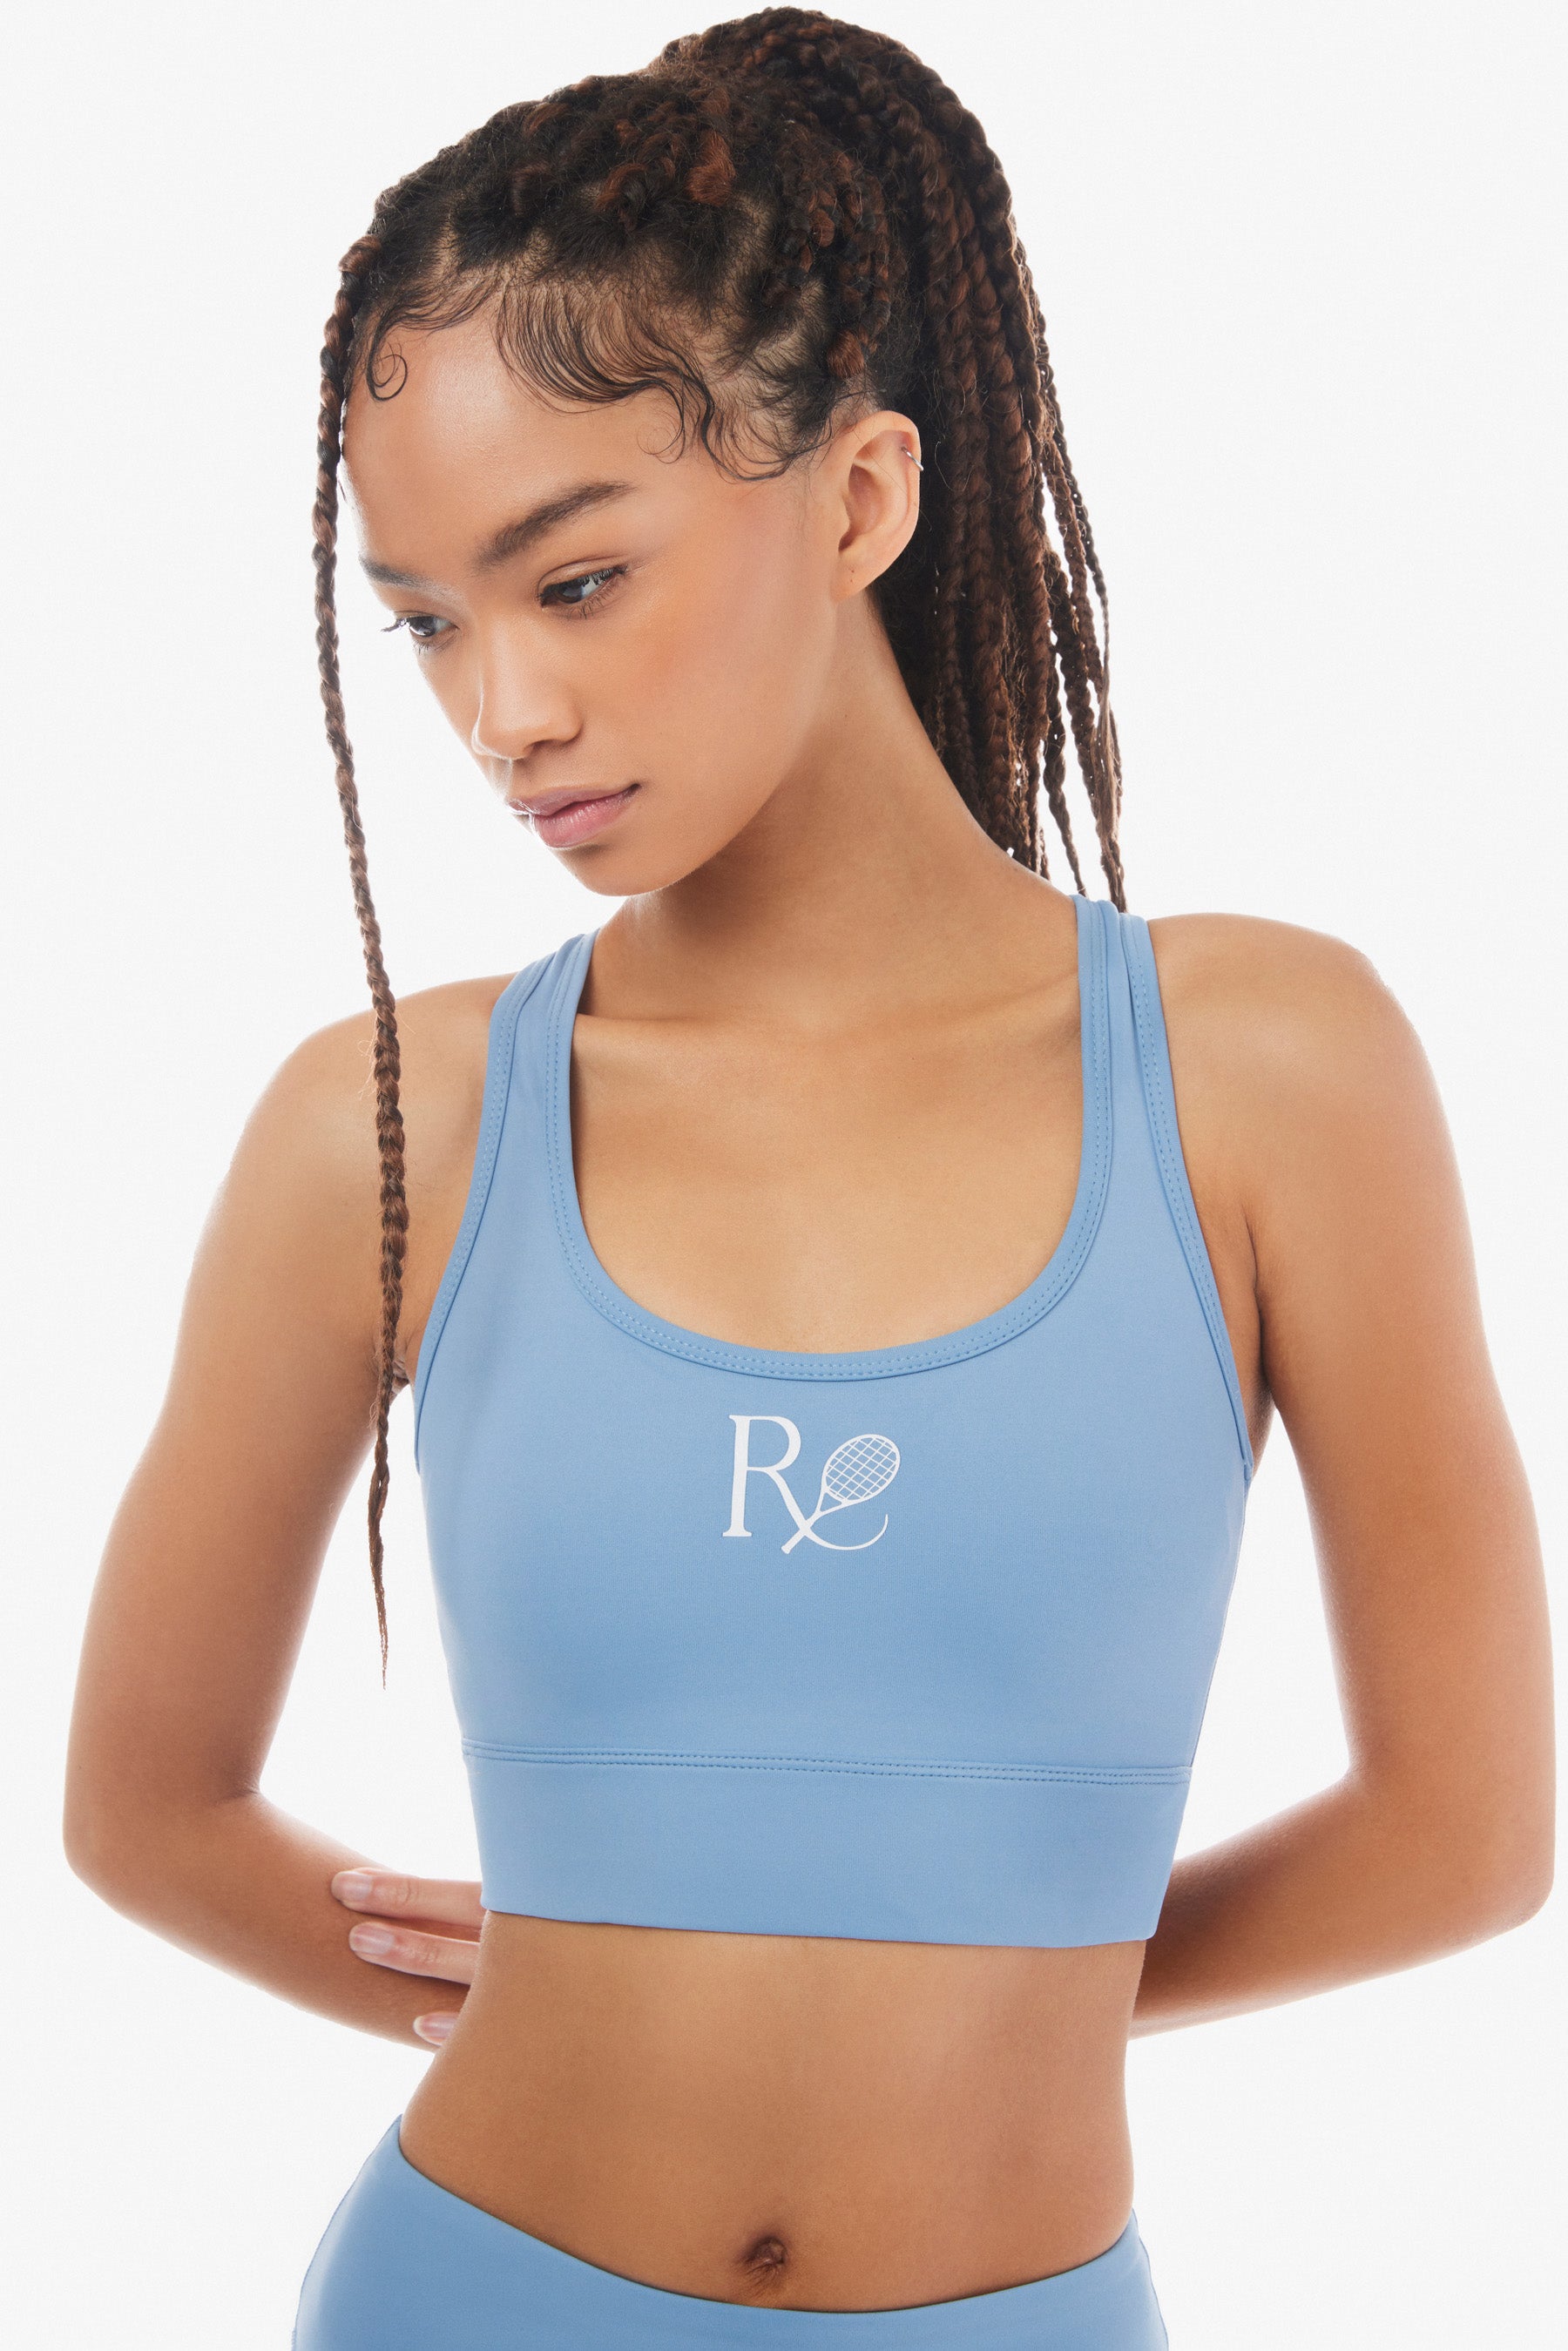 JoyLab Tropical Blue Longline Cropped Tank Top With Built In Sports Bra XS  - $14 - From Brittany